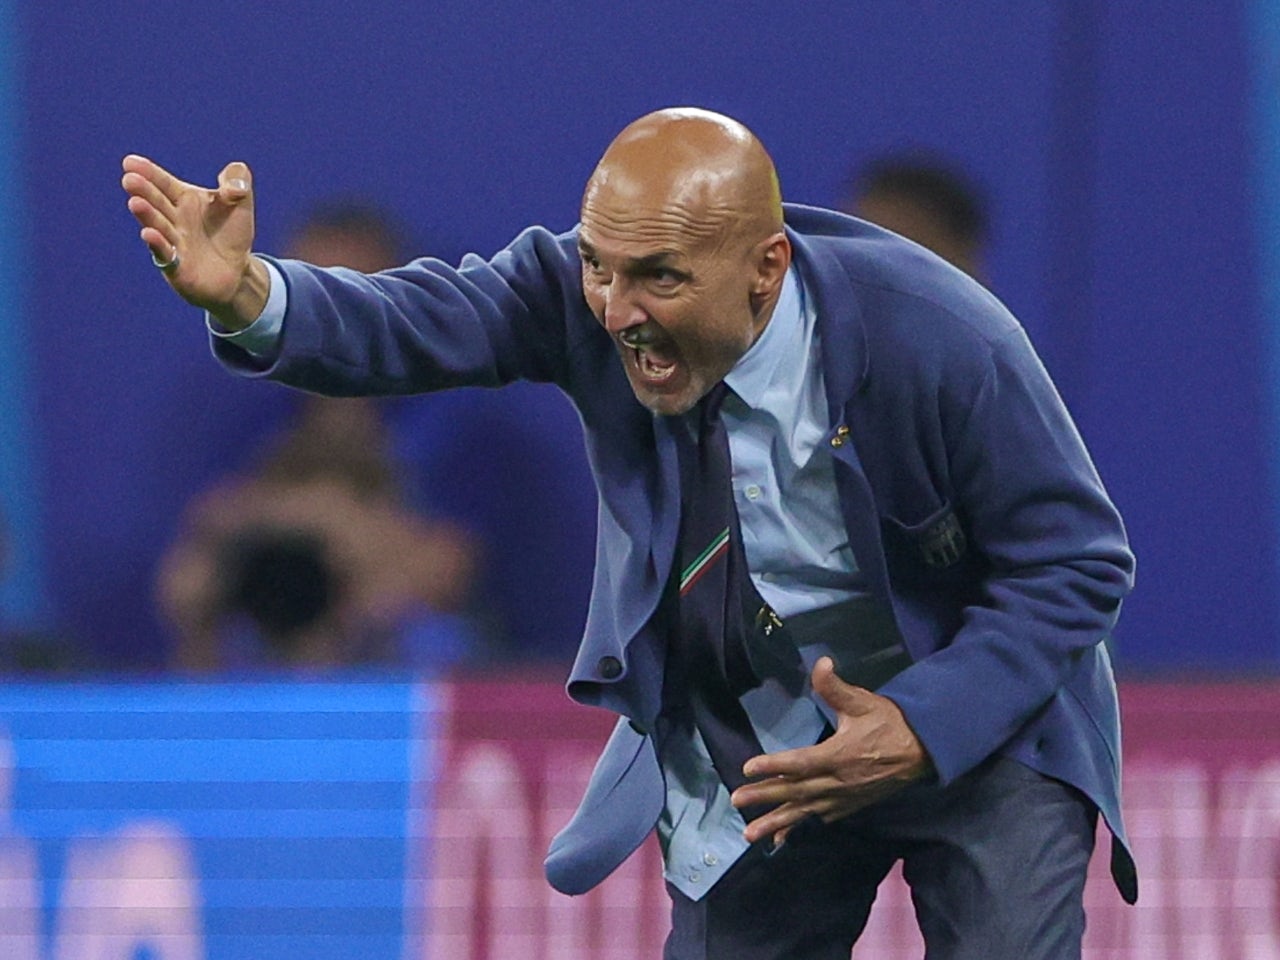 Luciano Spalletti defends tactics after 'timid' Italy display in Croatia draw